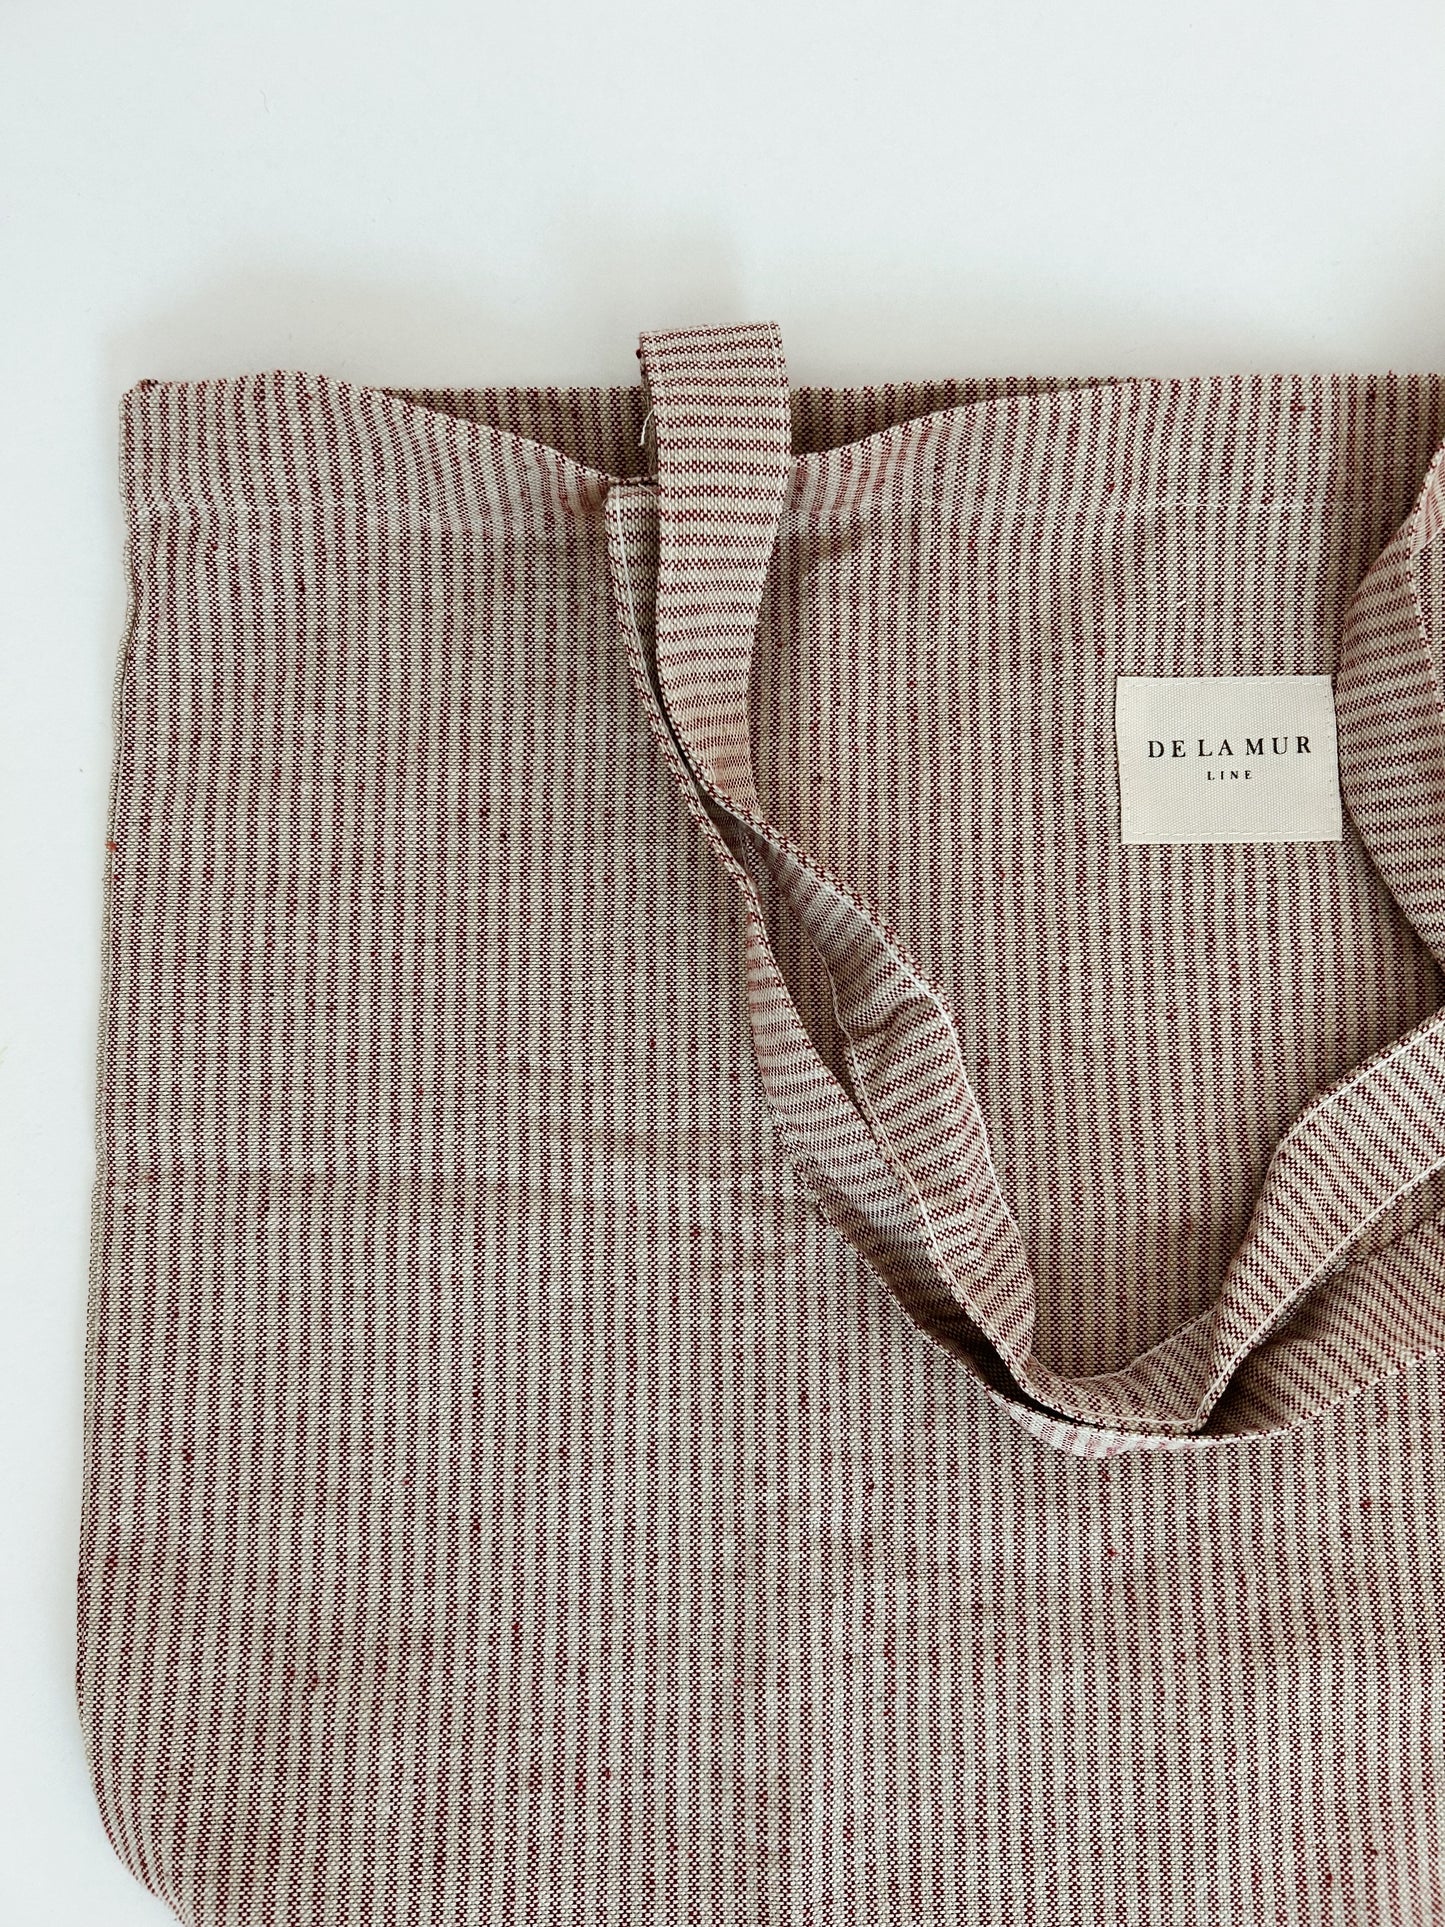 Oversized Soft Pink Striped Tote